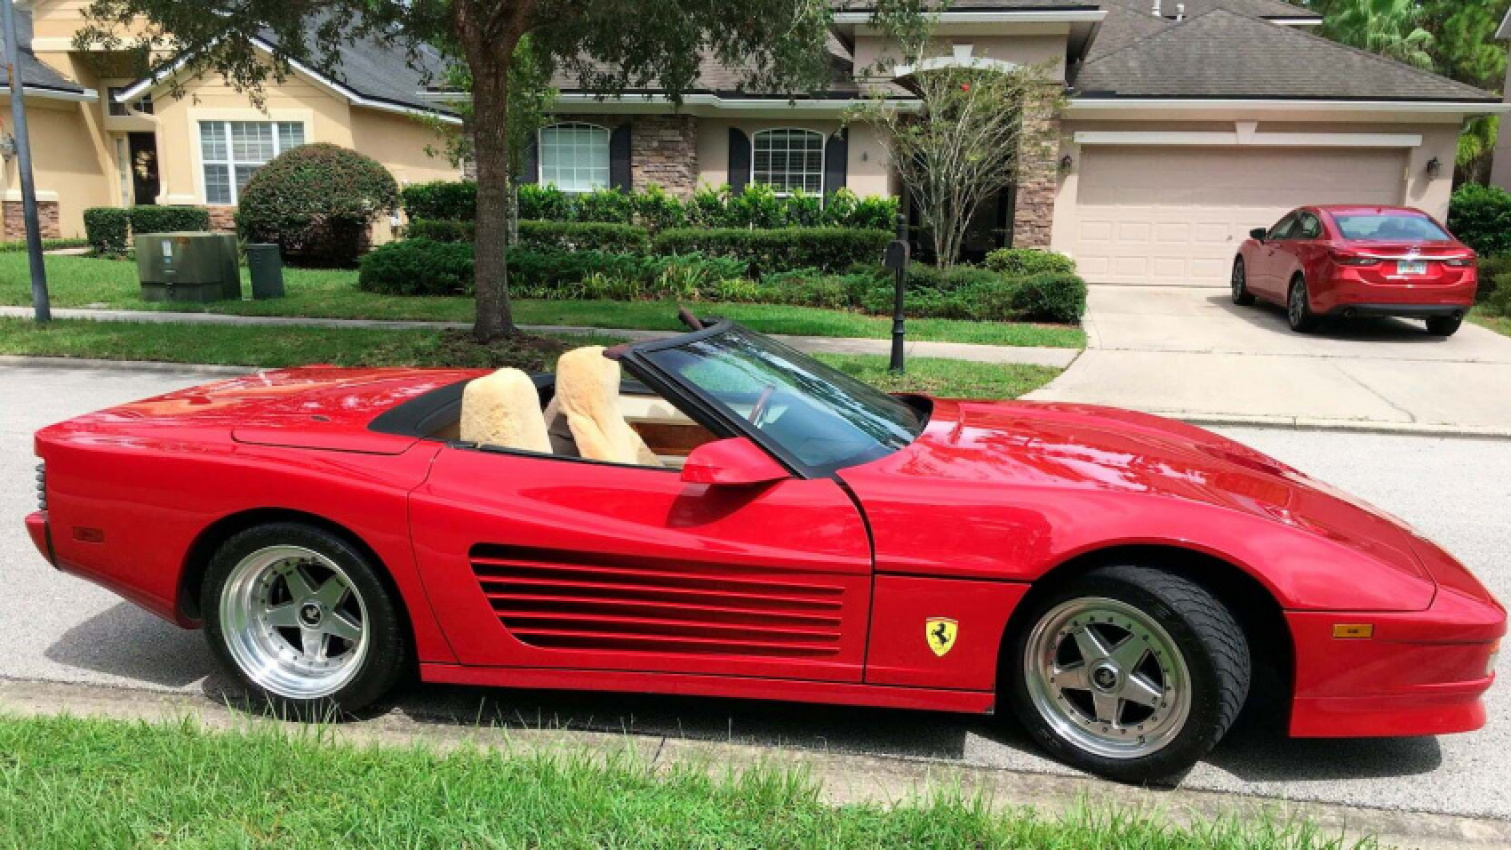 autos, cars, chevrolet, chevrolet corvette, corvette, ferrari, corvette, this ferrari-like corvette is actually a real thing